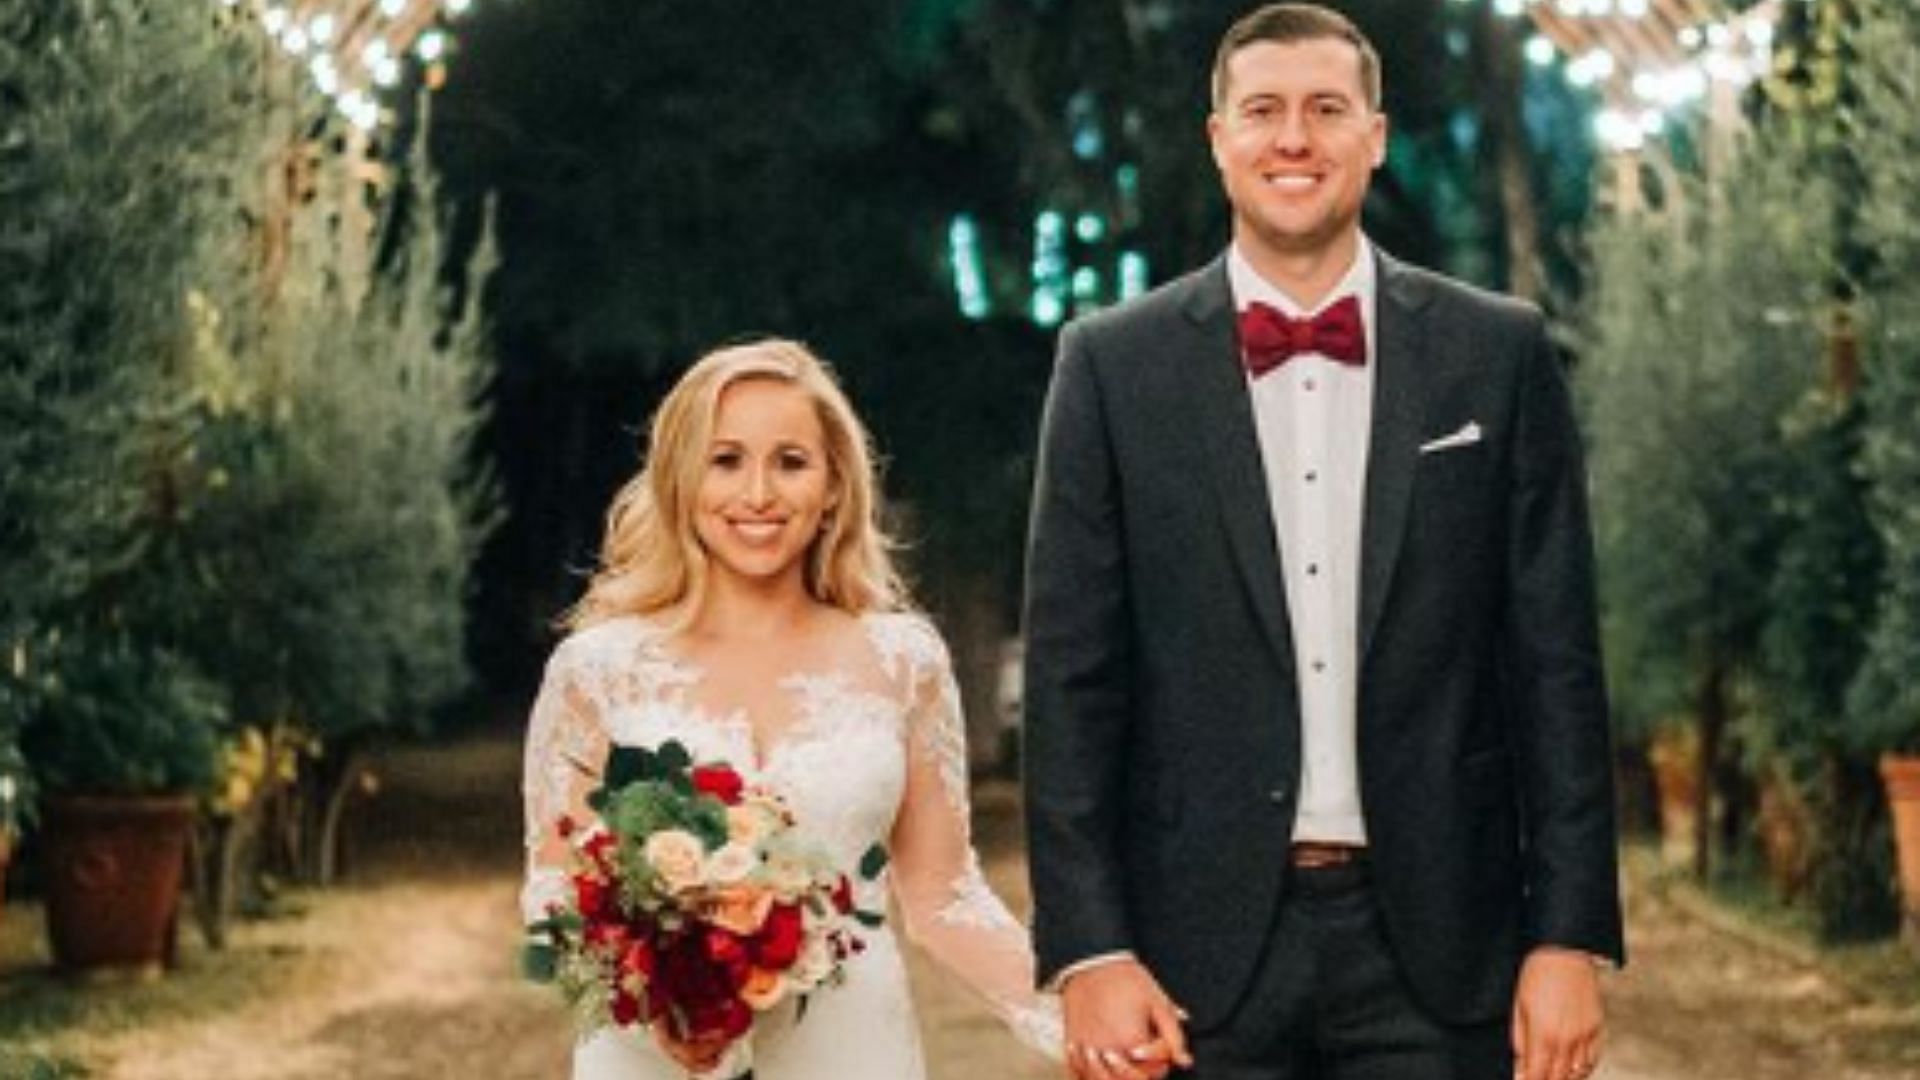 The late Los Angeles pitcher, Tyler Skaggs with his wife, Carli Skaggs. 